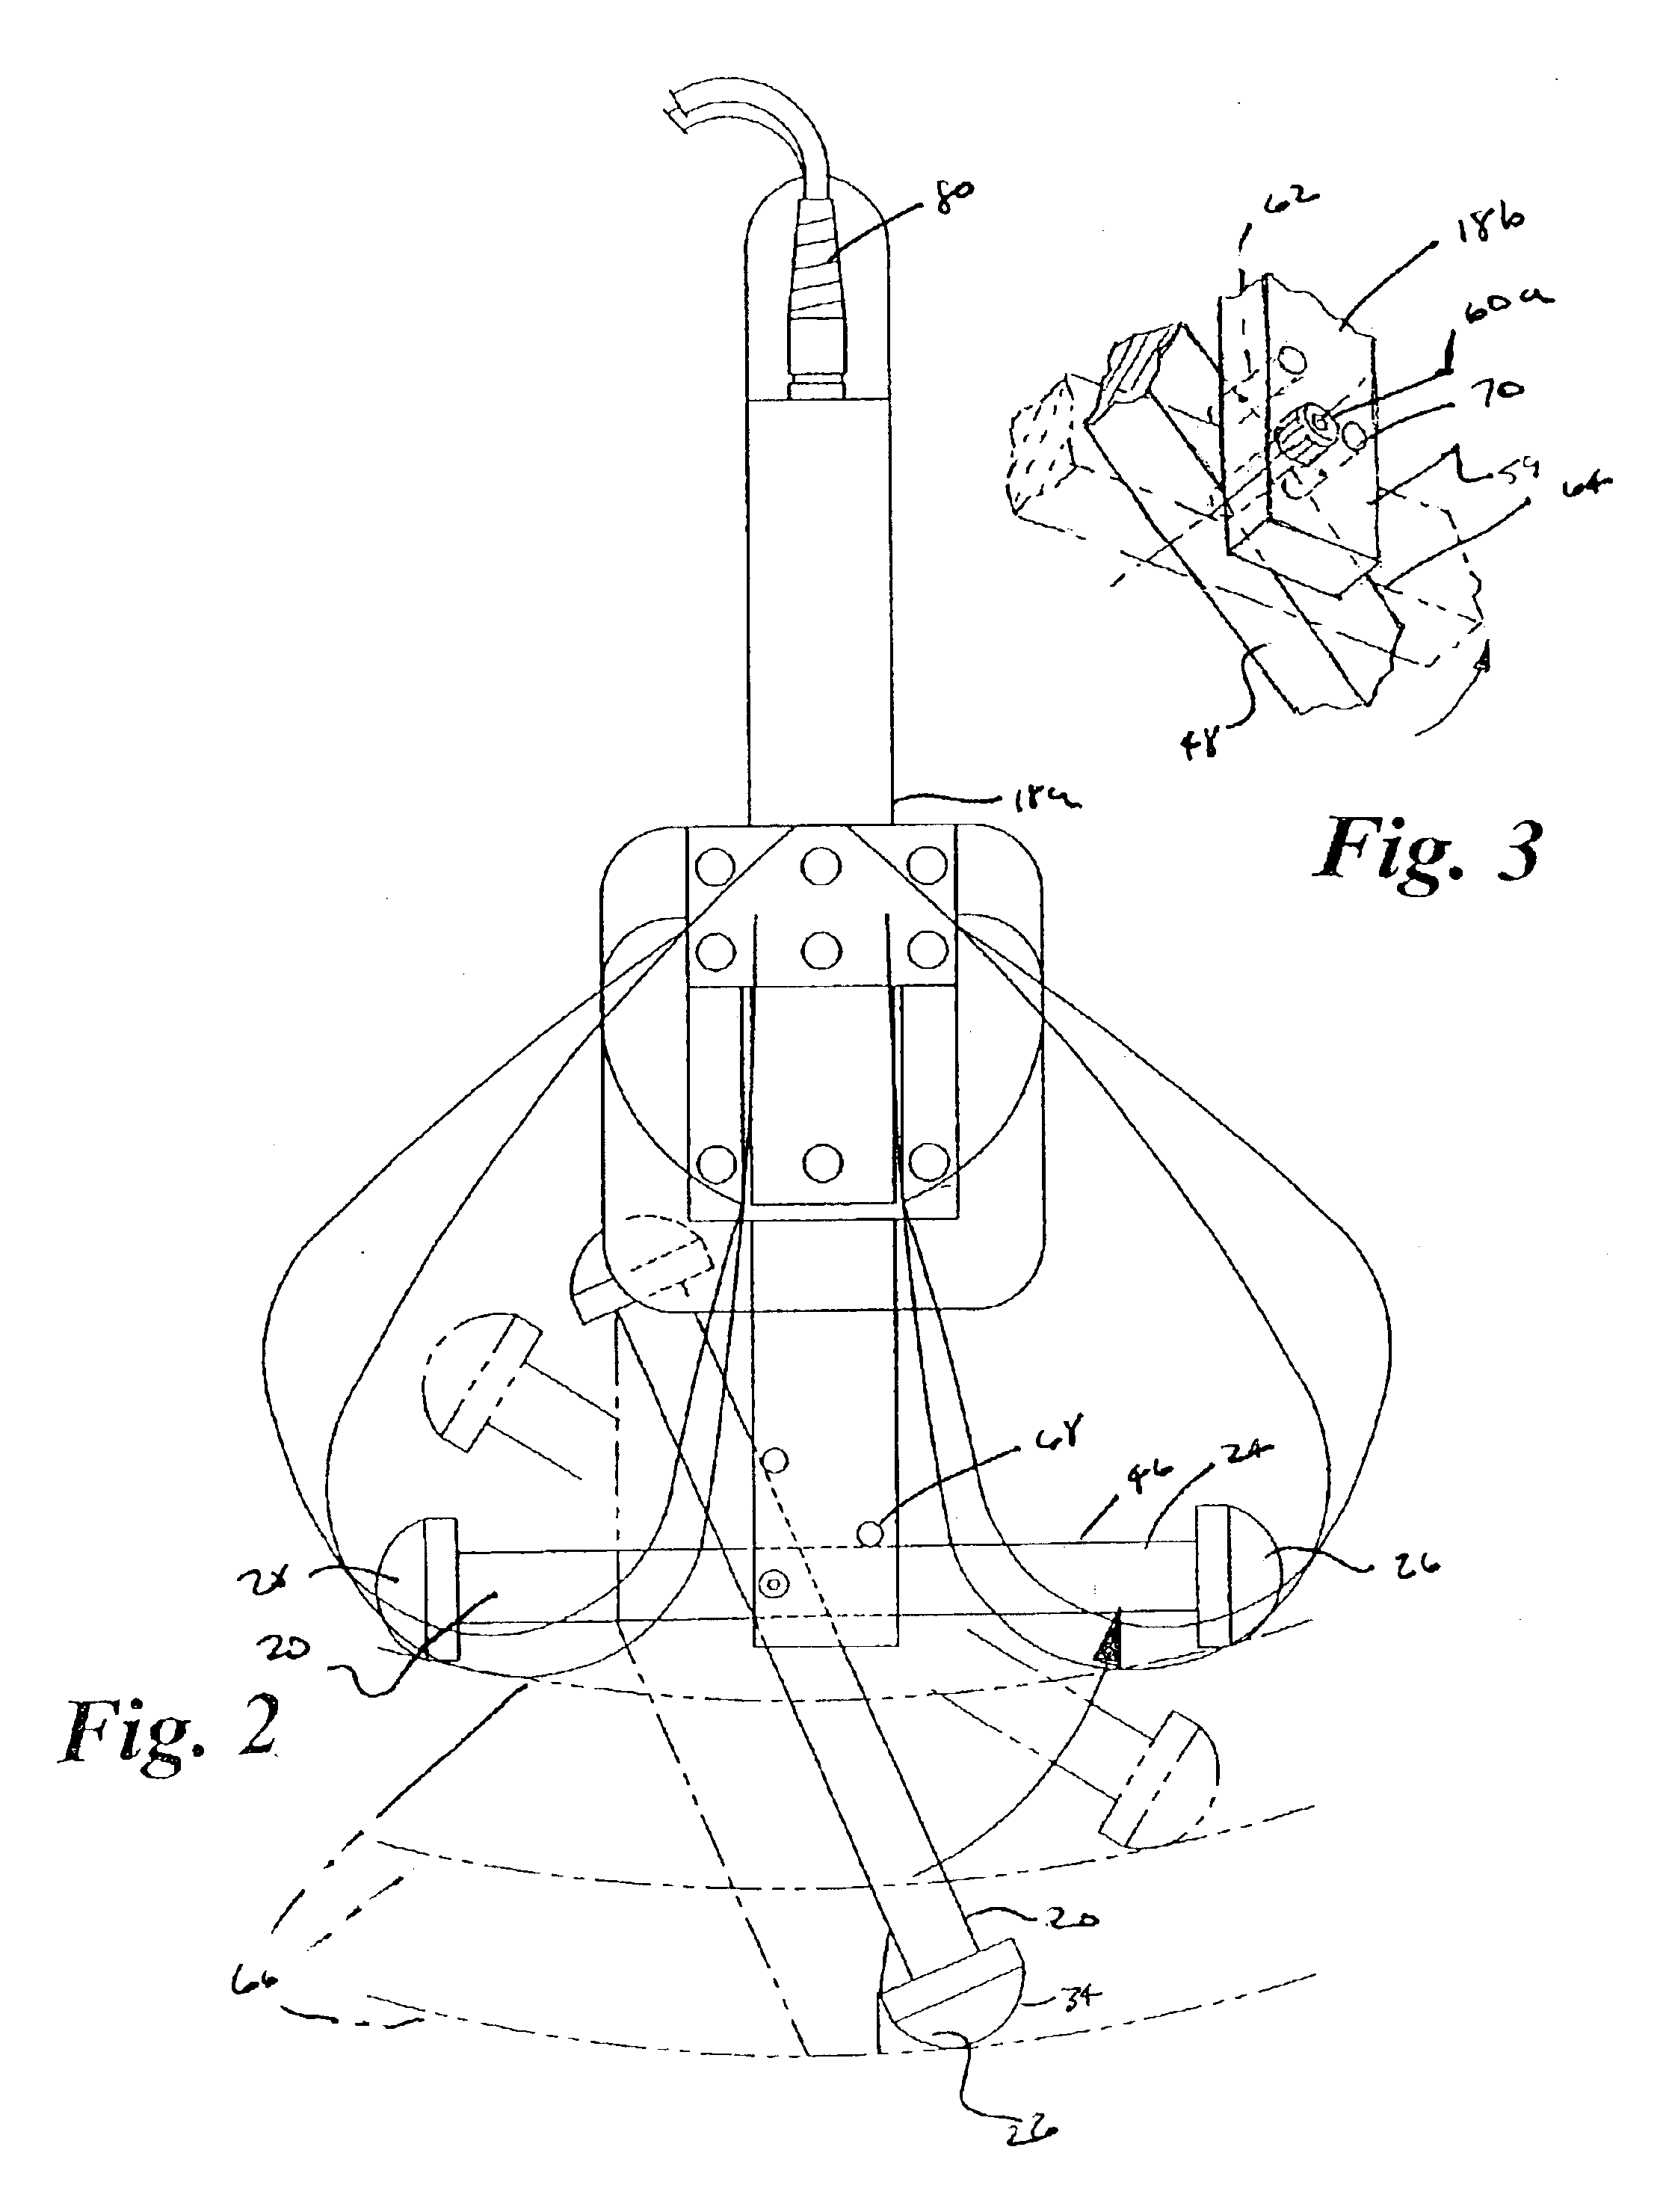 Apparatus and method for electronic tire testing